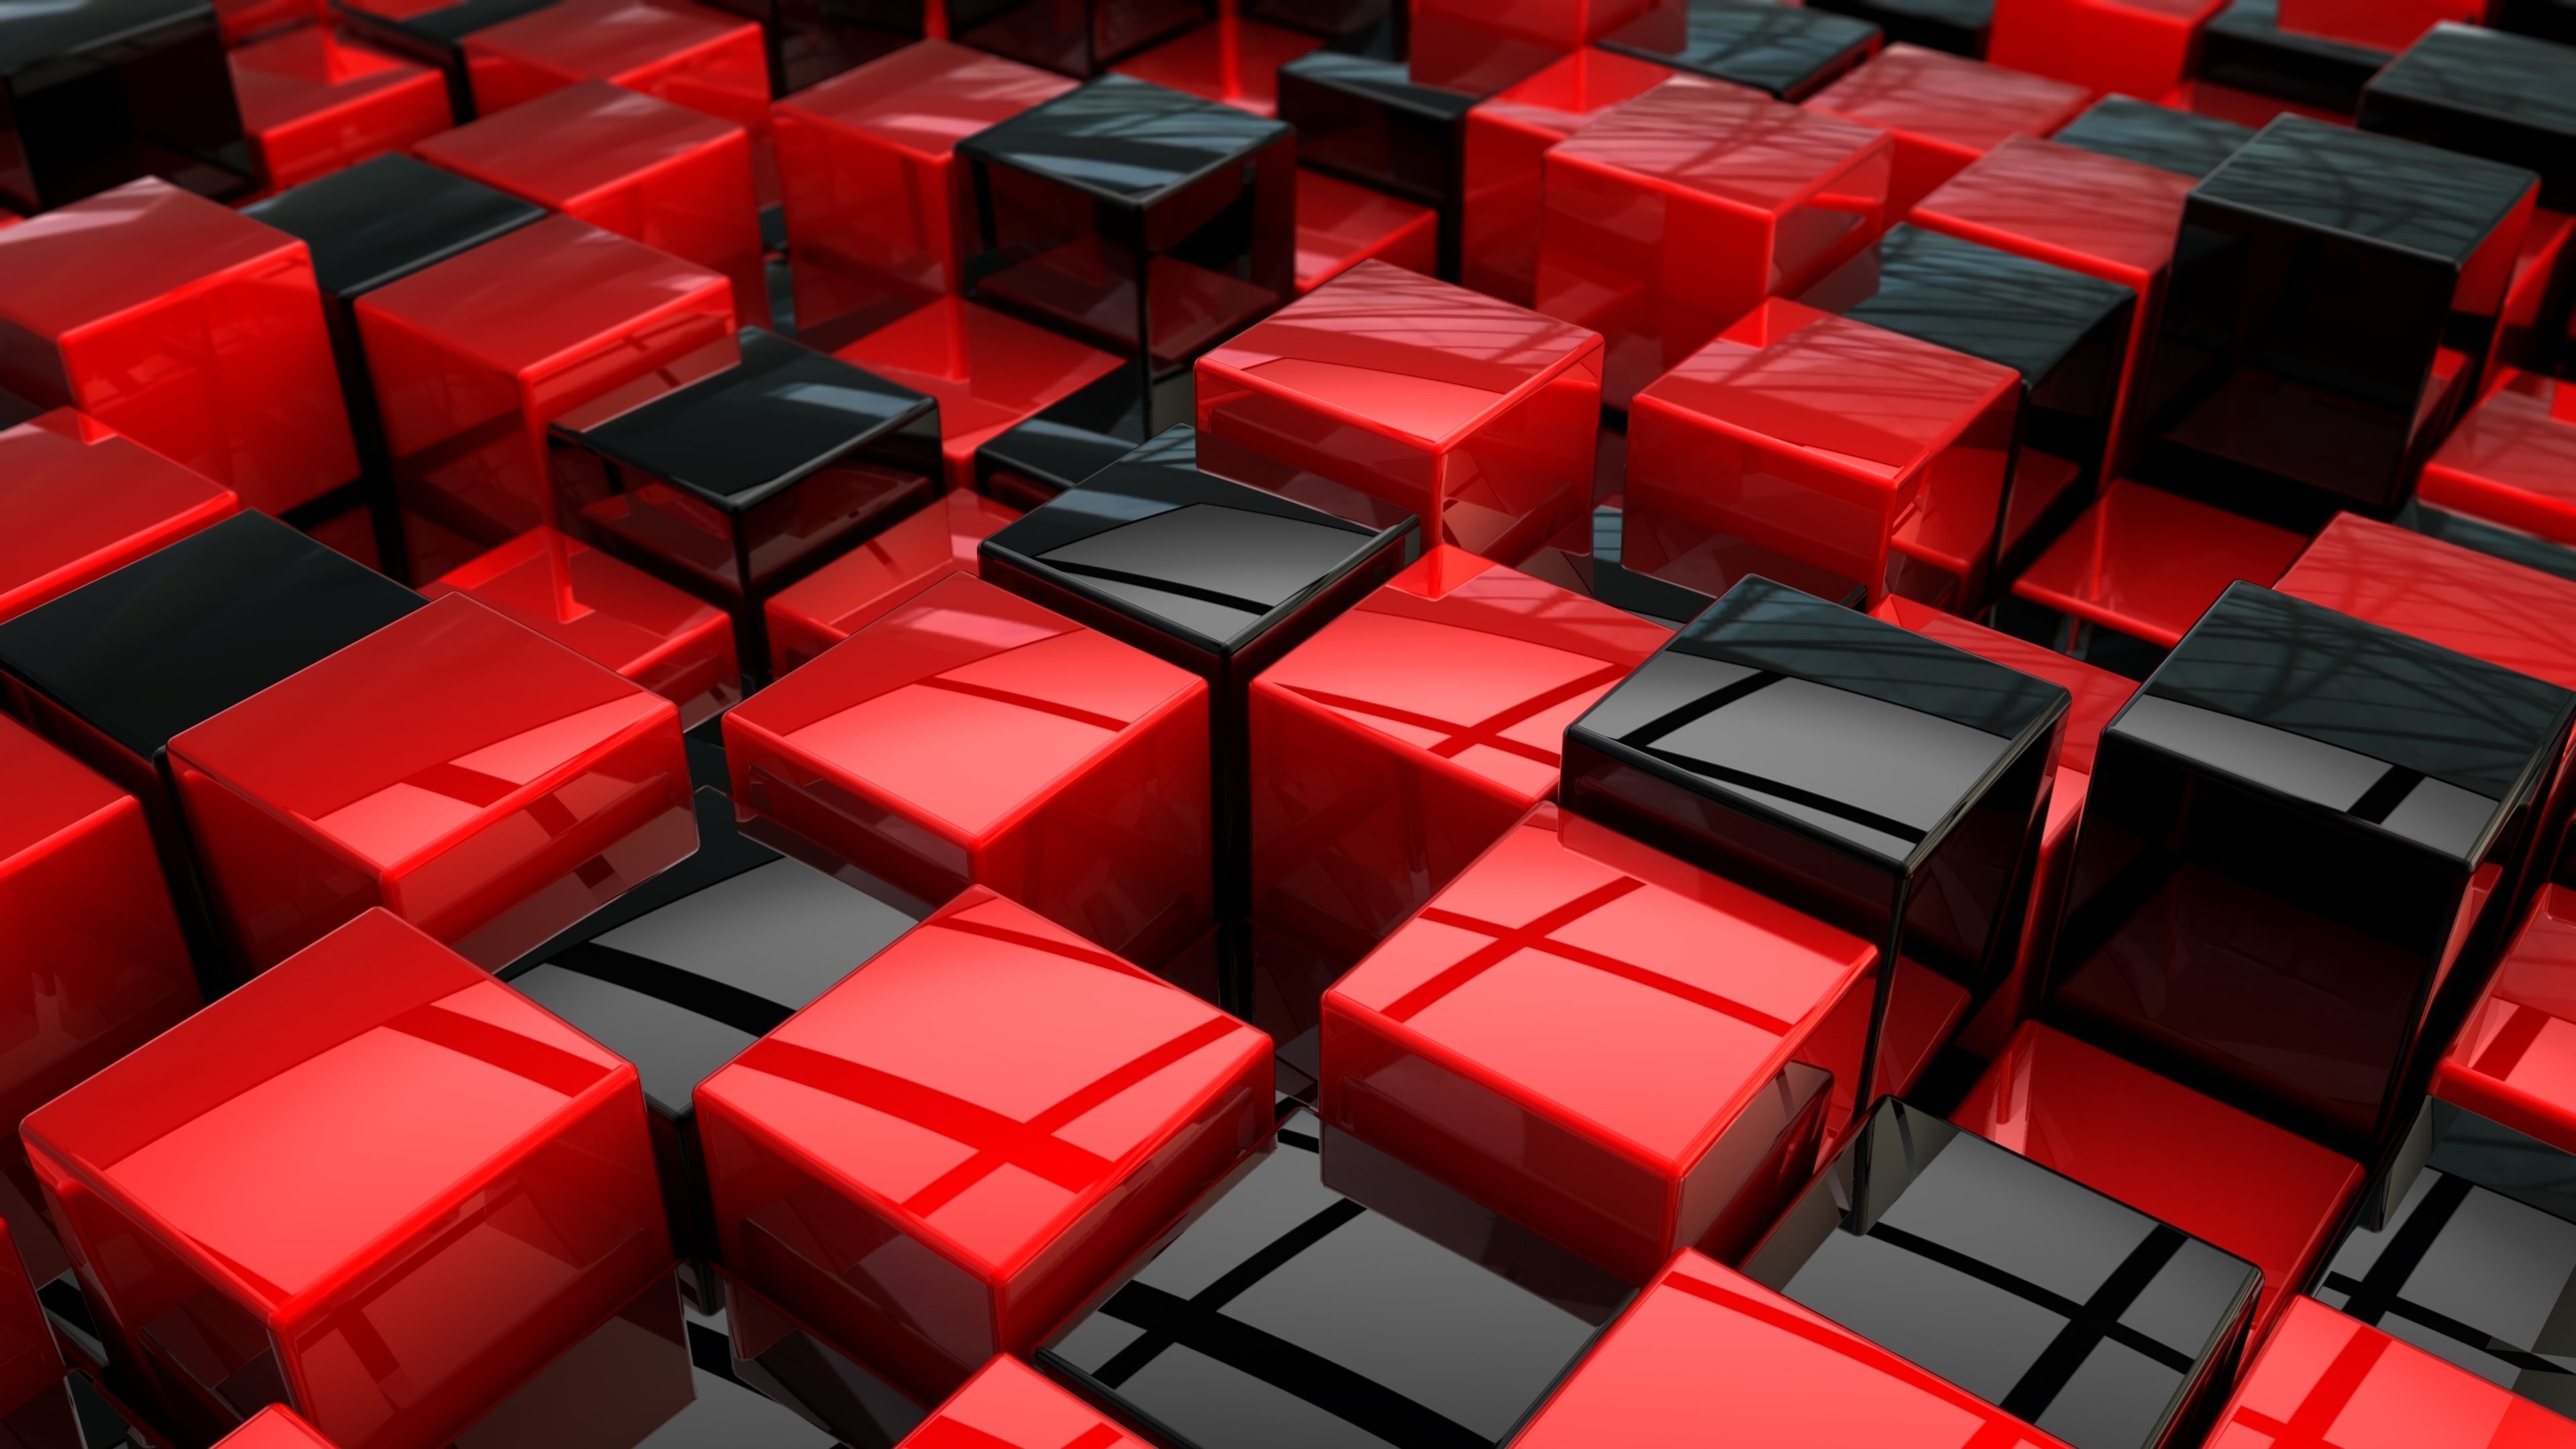 Red and black cubes, Abstract area design, Cool visual graphic, HD cube structures, Block pattern wallpaper, 3840x2160 4K Desktop